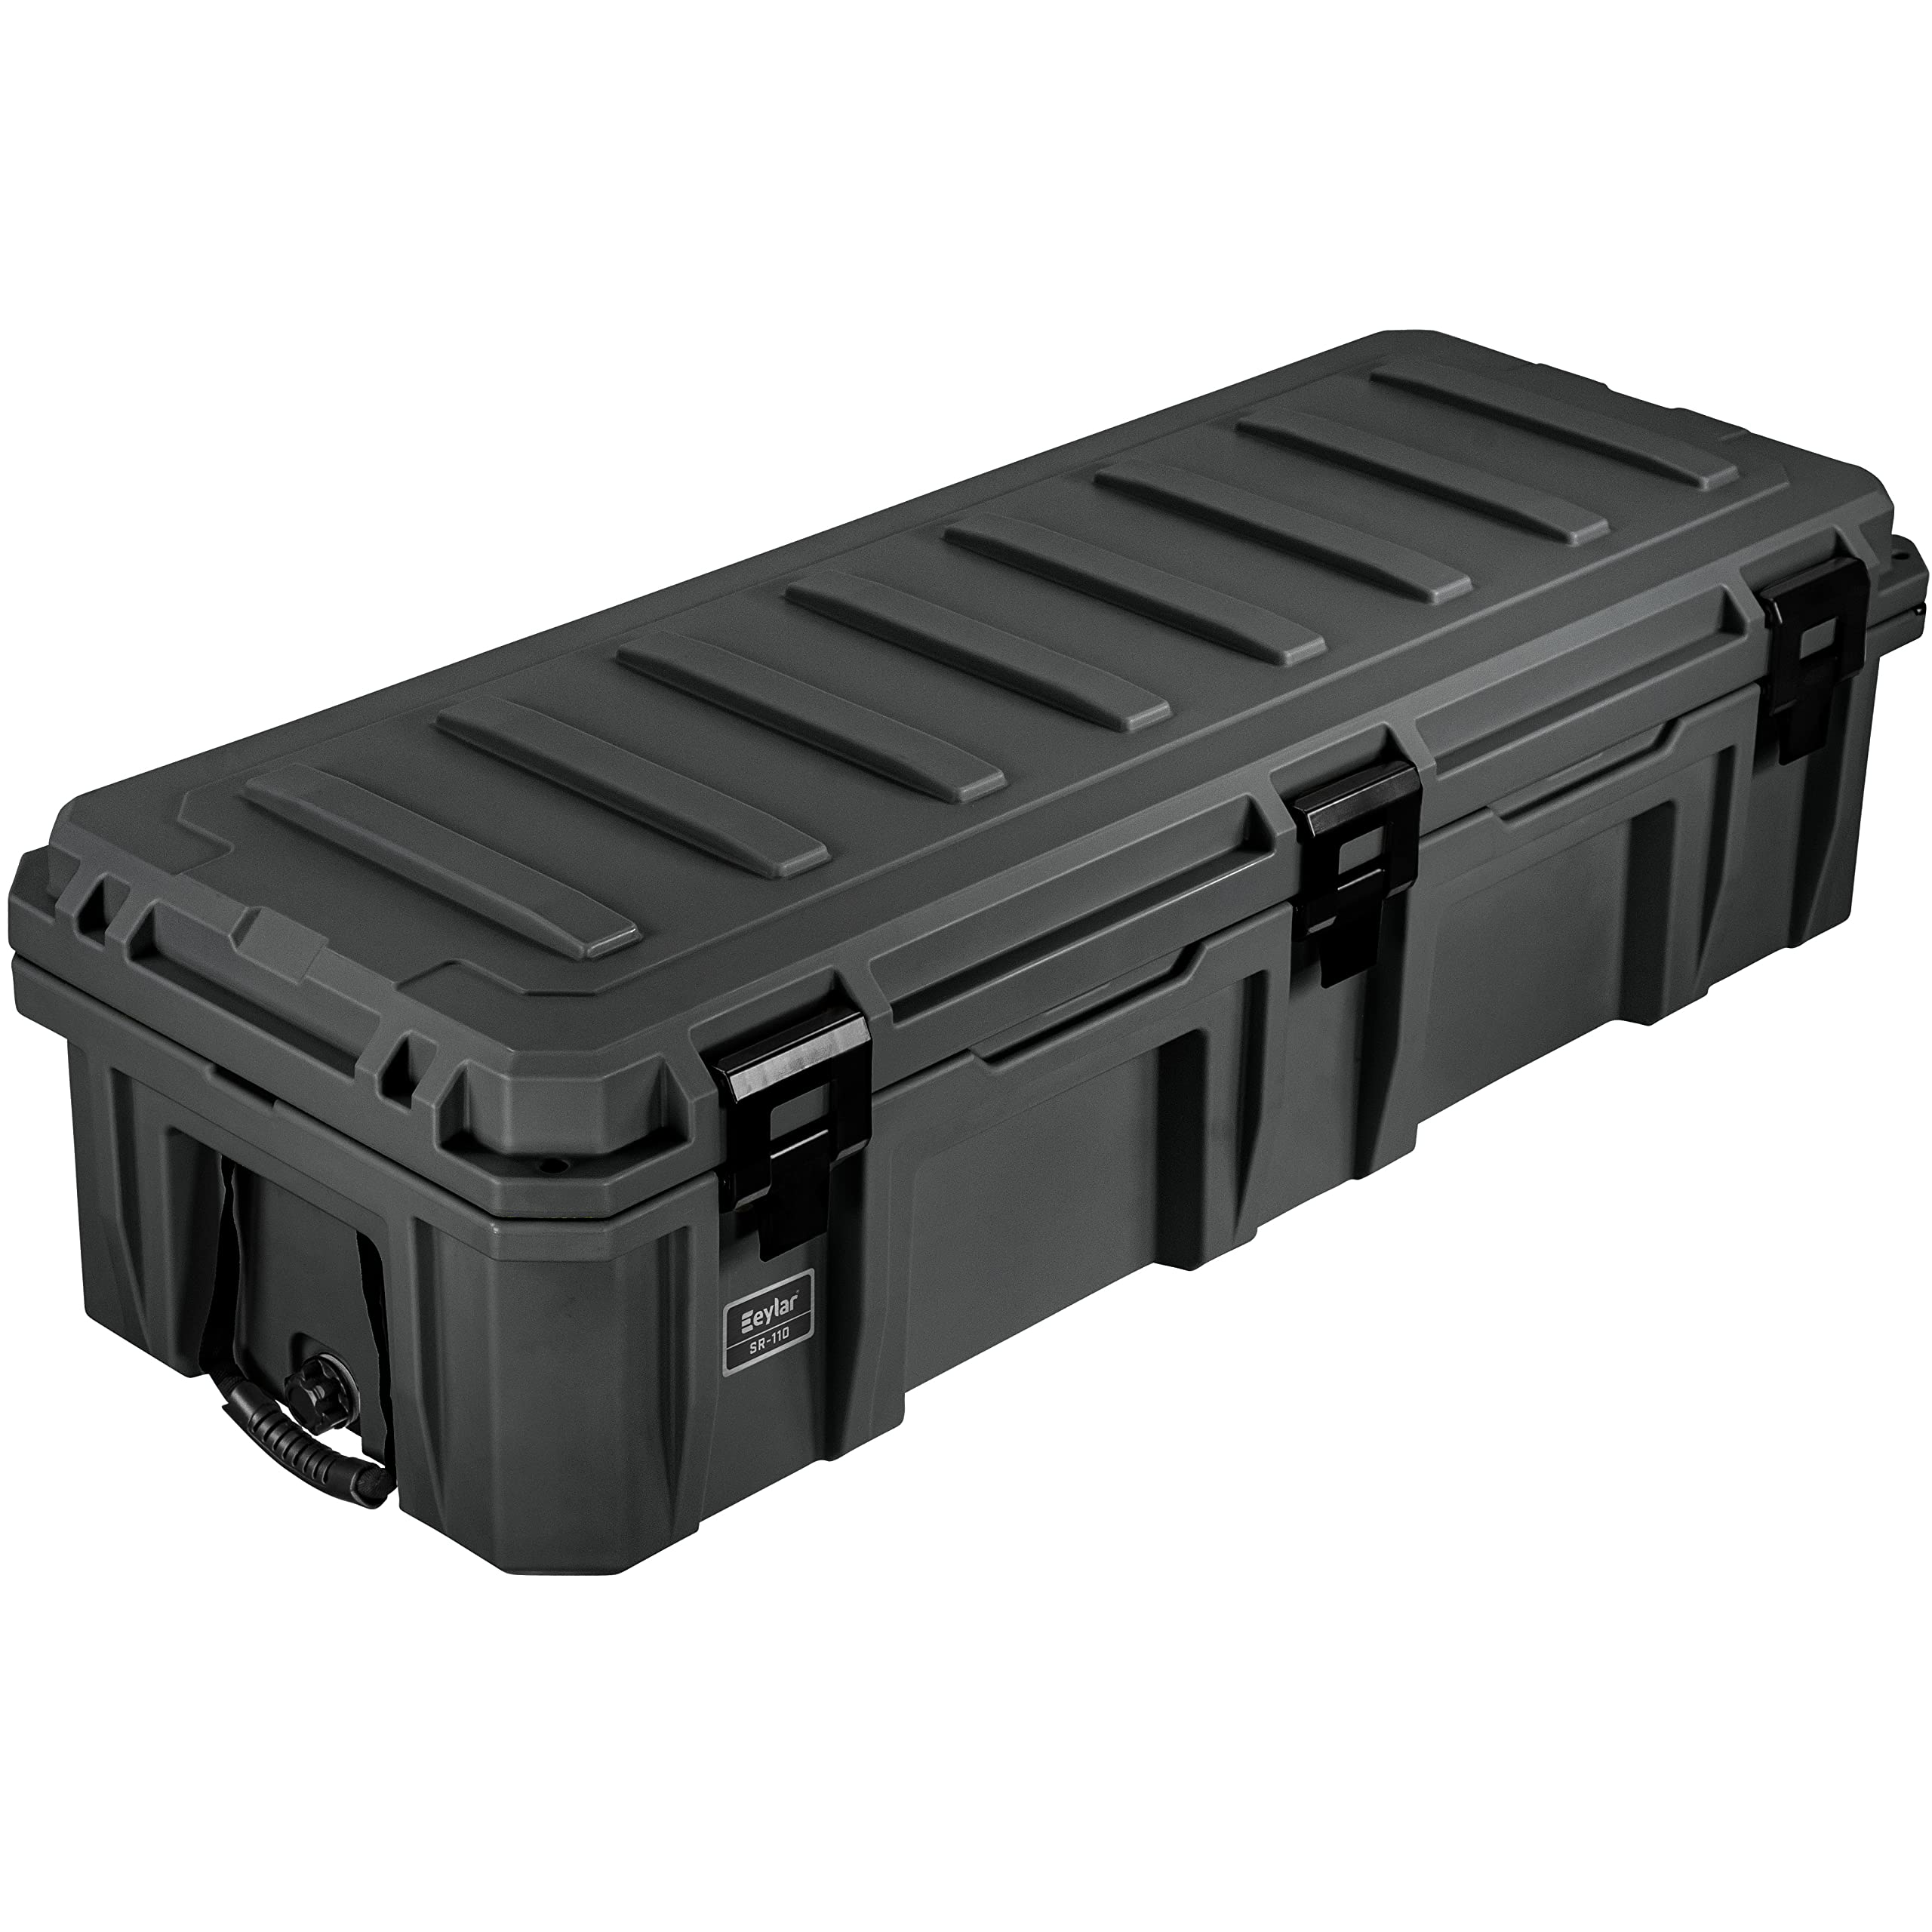 SR-110 Crossover Overland Cargo Case, Equipment Hard Case, Roto Molded, Stackable with Pad-Lock Hasp, Strap Mountable, TSA Standard, IPX4 Rated (Black)